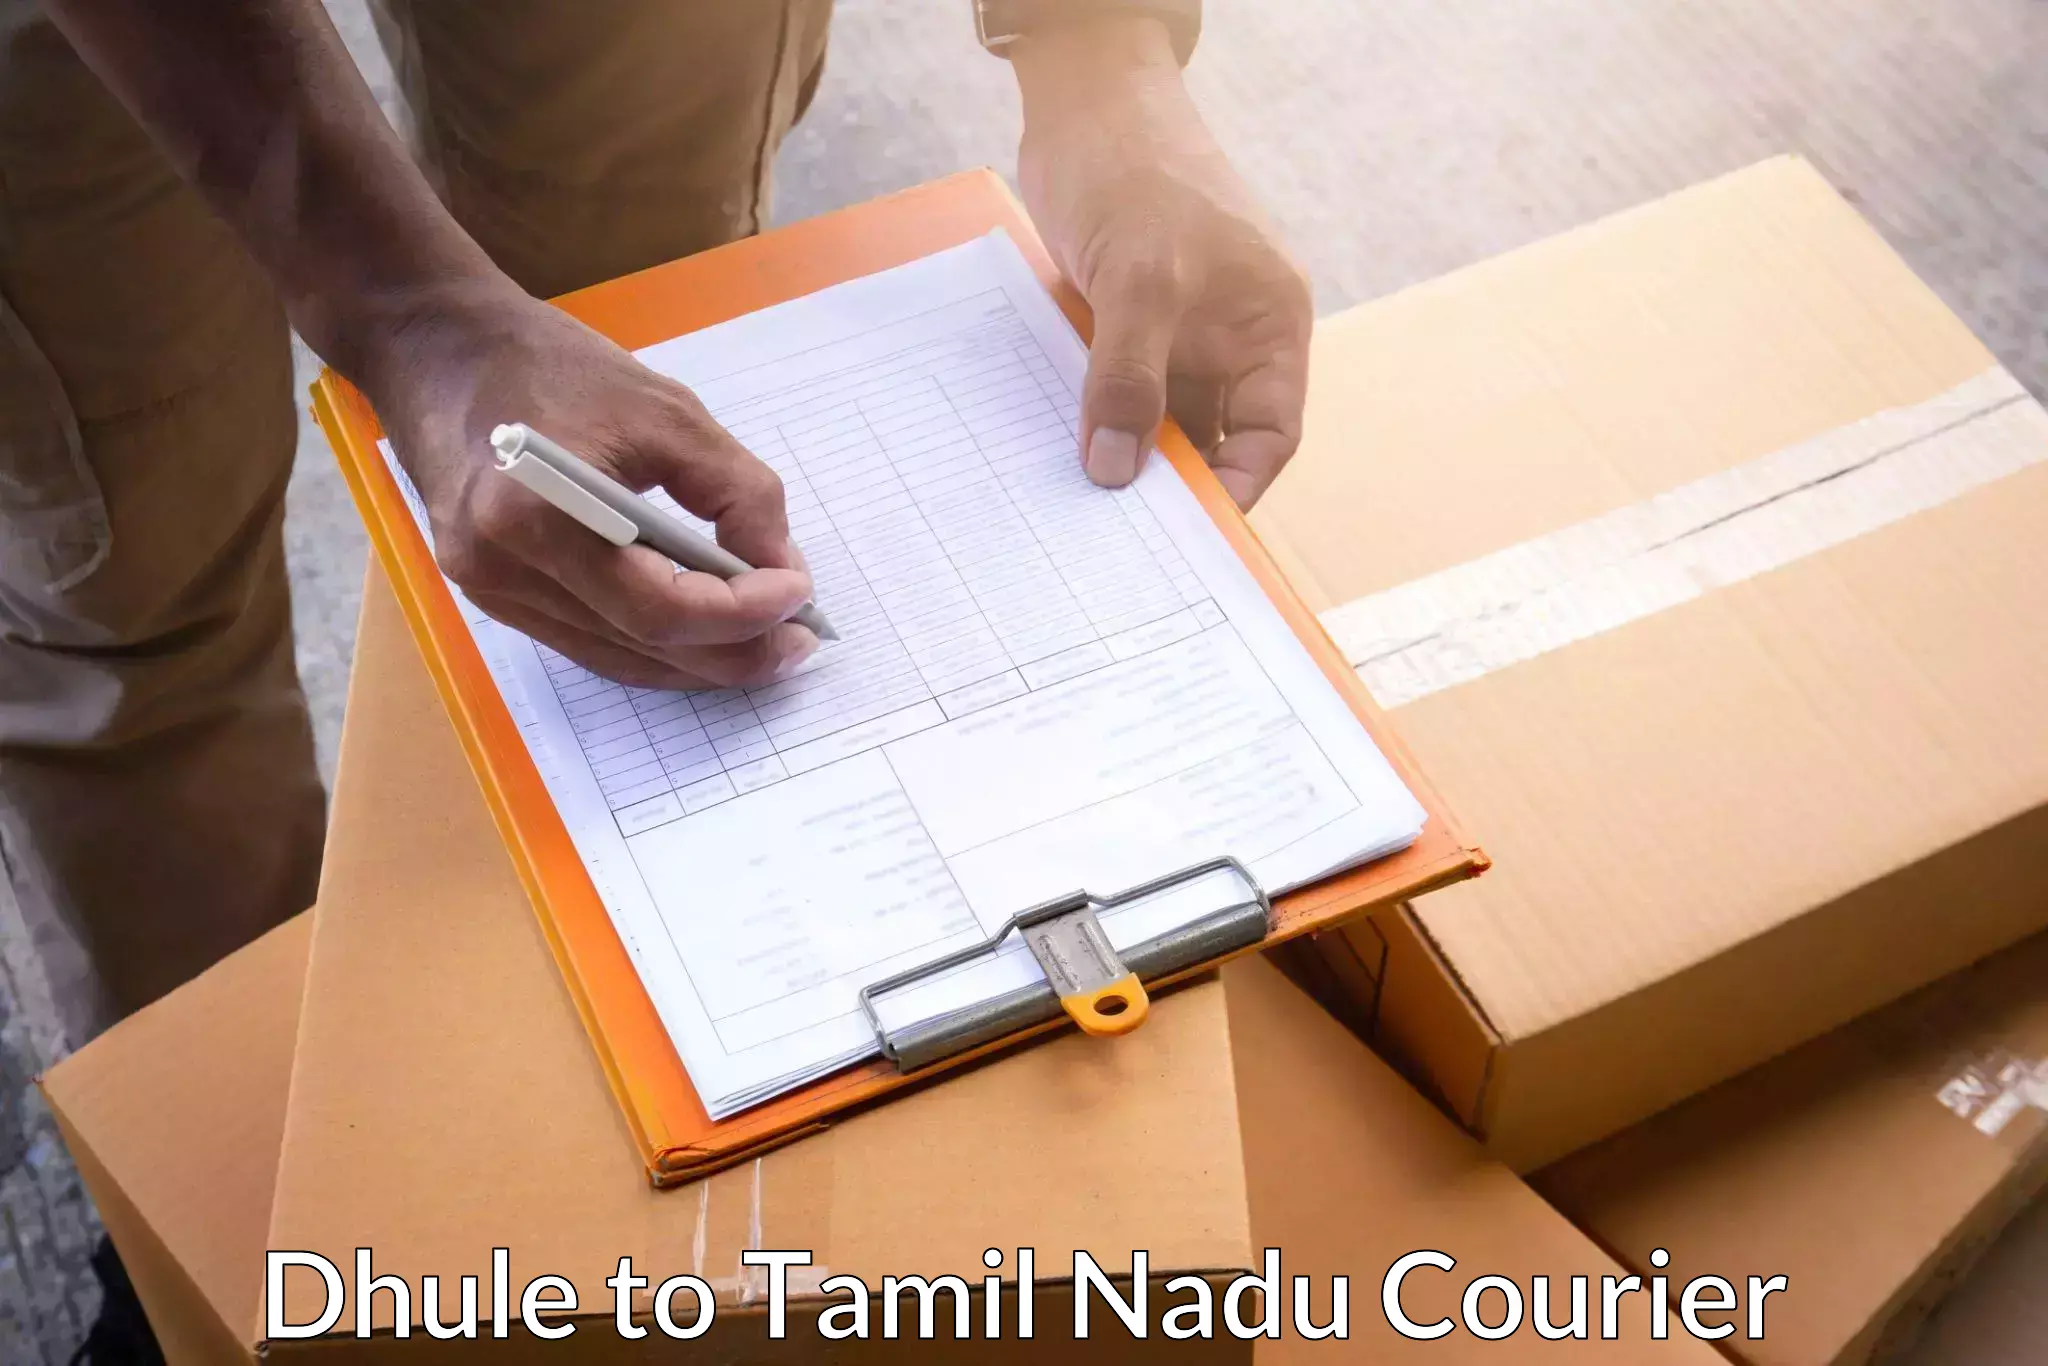 State-of-the-art courier technology Dhule to Tamil Nadu